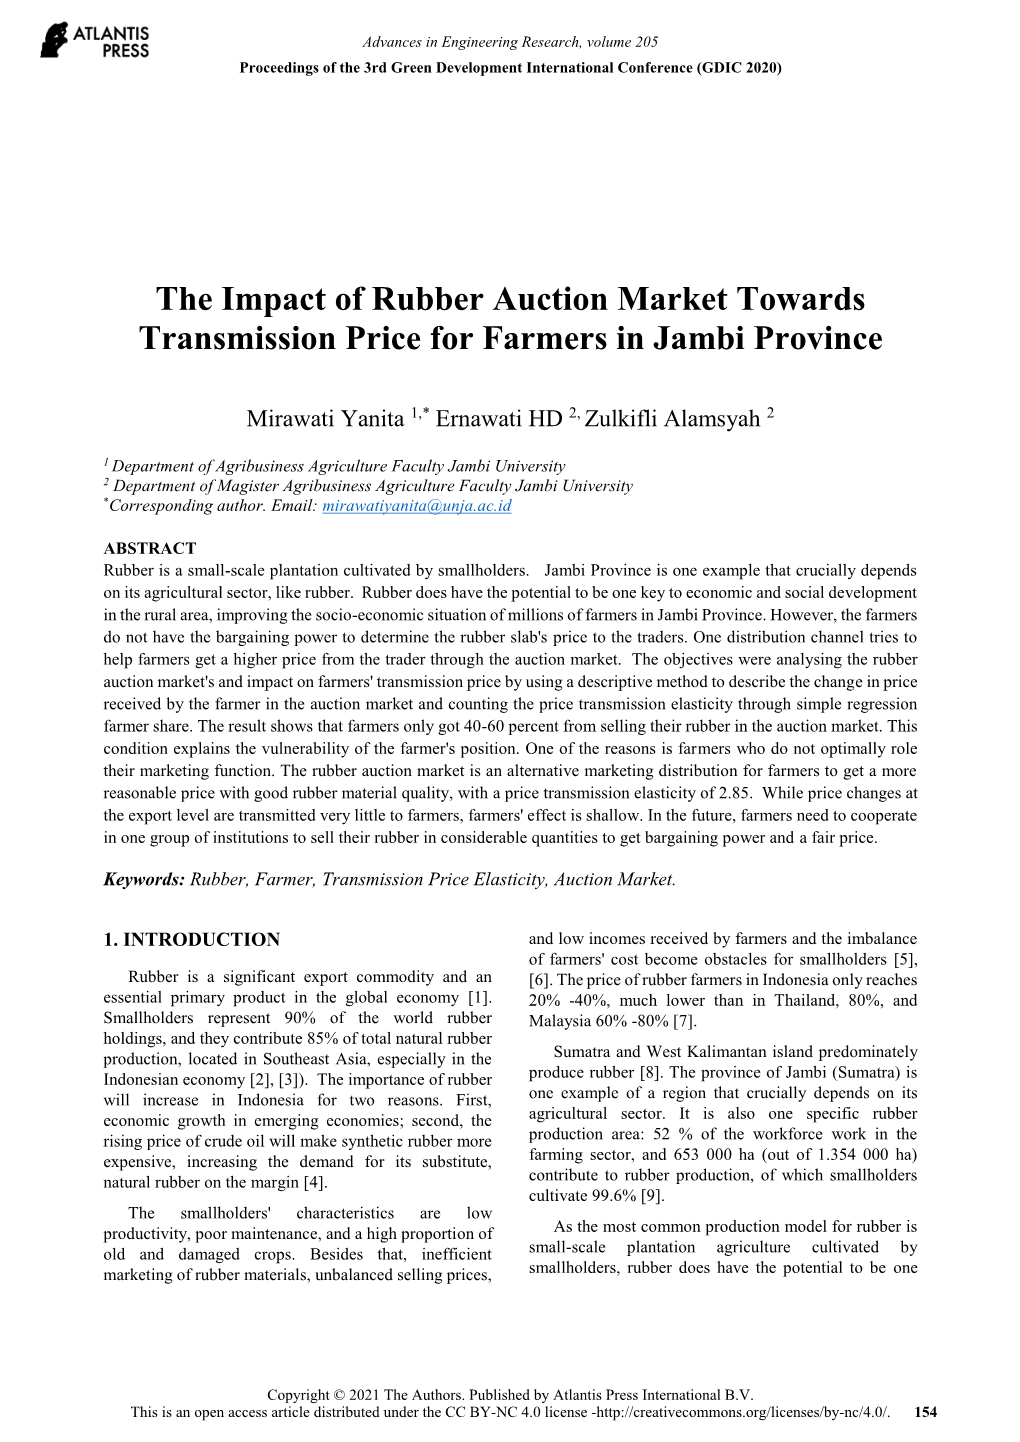 The Impact of Rubber Auction Market Towards Transmission Price for Farmers in Jambi Province